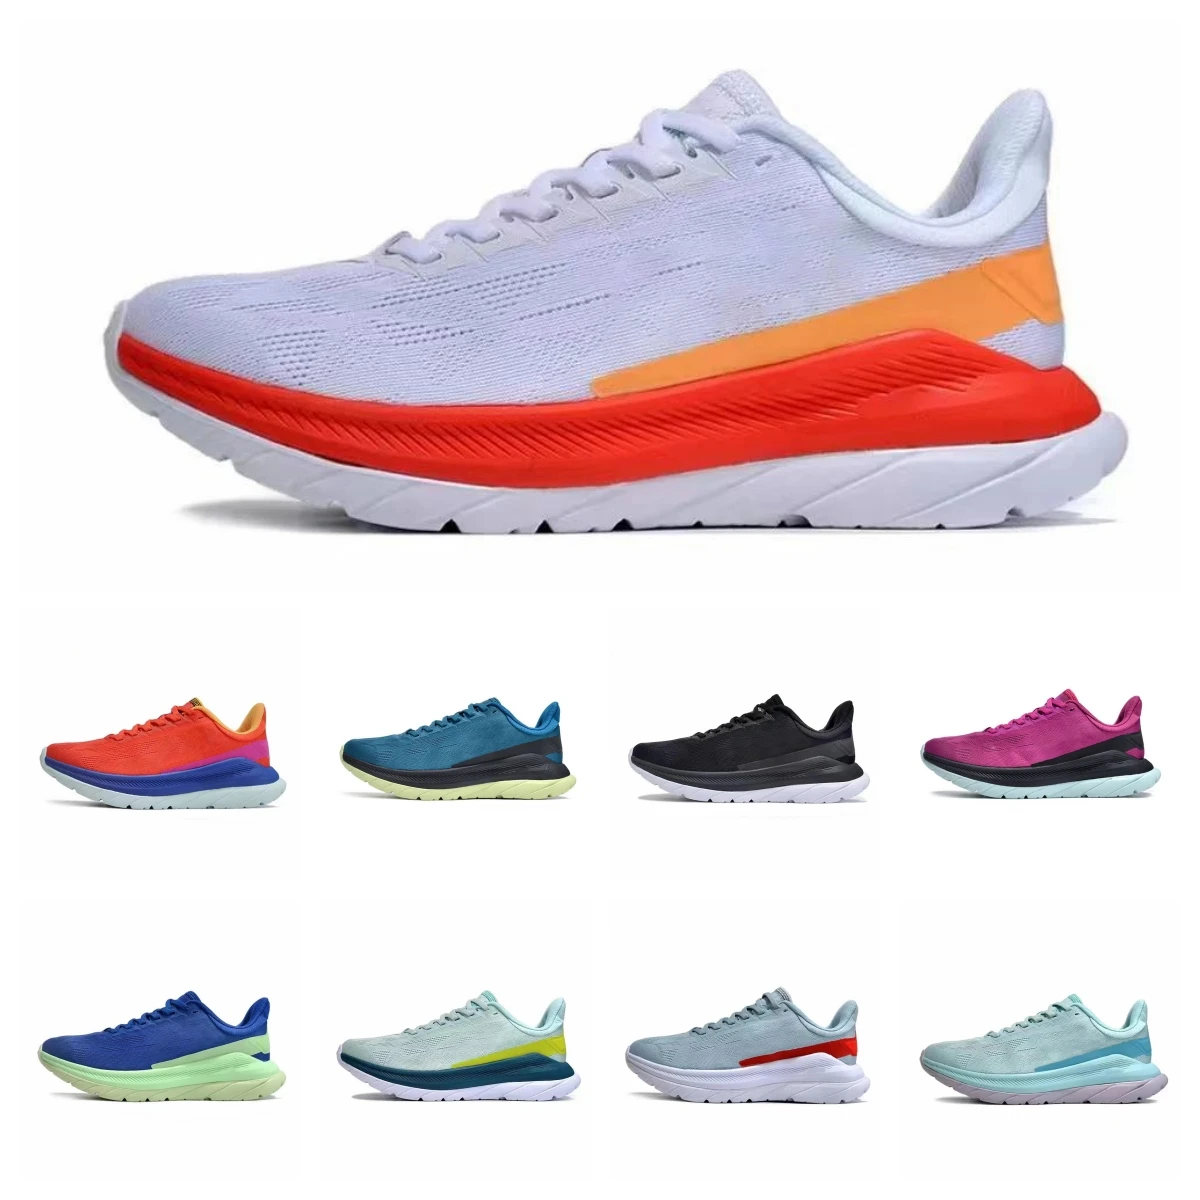 

MuluszCup Luxury Unisex New Mesh Breathable Jogging Men Women Running Shoes Lightweight Mach 4 Sports Casual Tennis Shoes